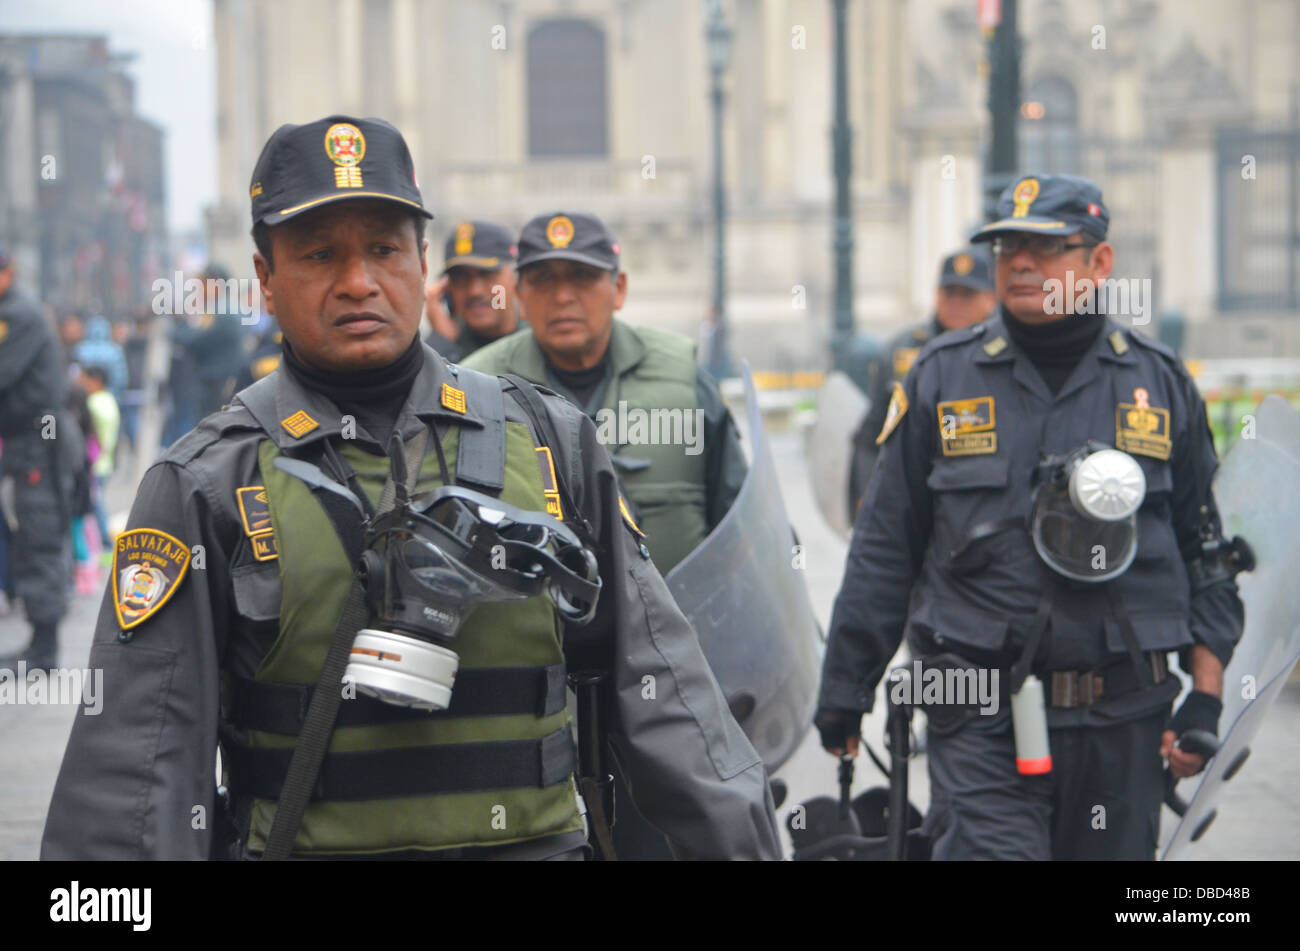 Peruvian military presence in front of the Presidential palace, Plaza de Armas, Lima, Peru Stock Photo